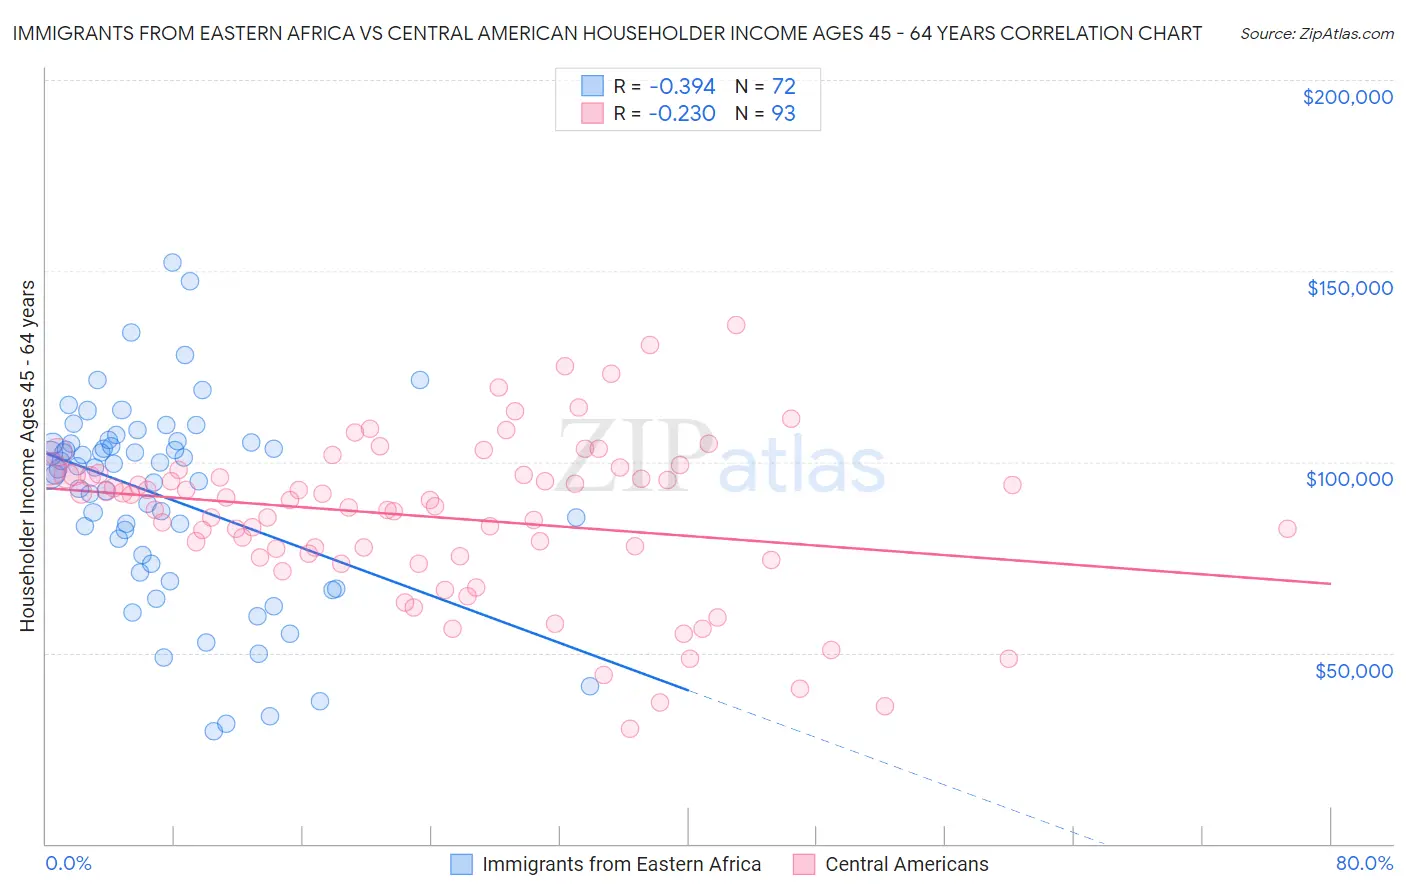 Immigrants from Eastern Africa vs Central American Householder Income Ages 45 - 64 years